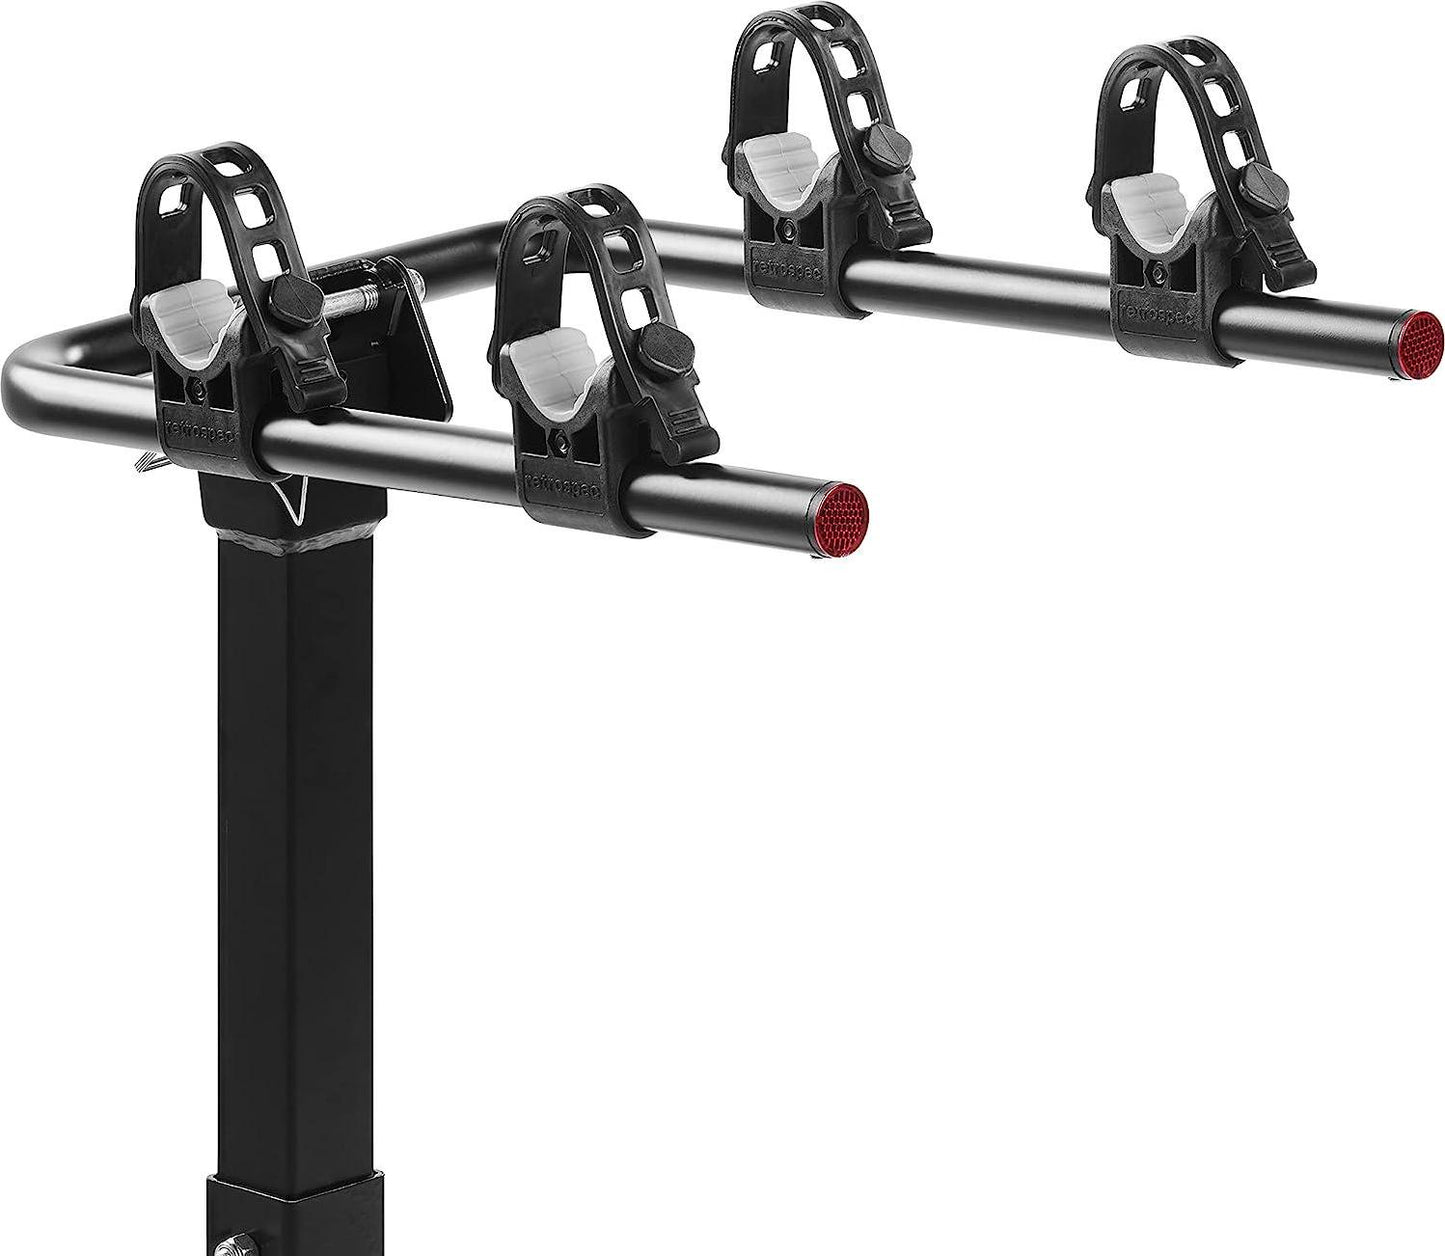 Lenox 2-5 - Bike Hitch Rack for Cars, Trucks, SUVs with 2 Hitch | Foldable Steel Frame with Anti-Rattle Adapter, Tie Down Cradles and Straps - Fits Most Frames